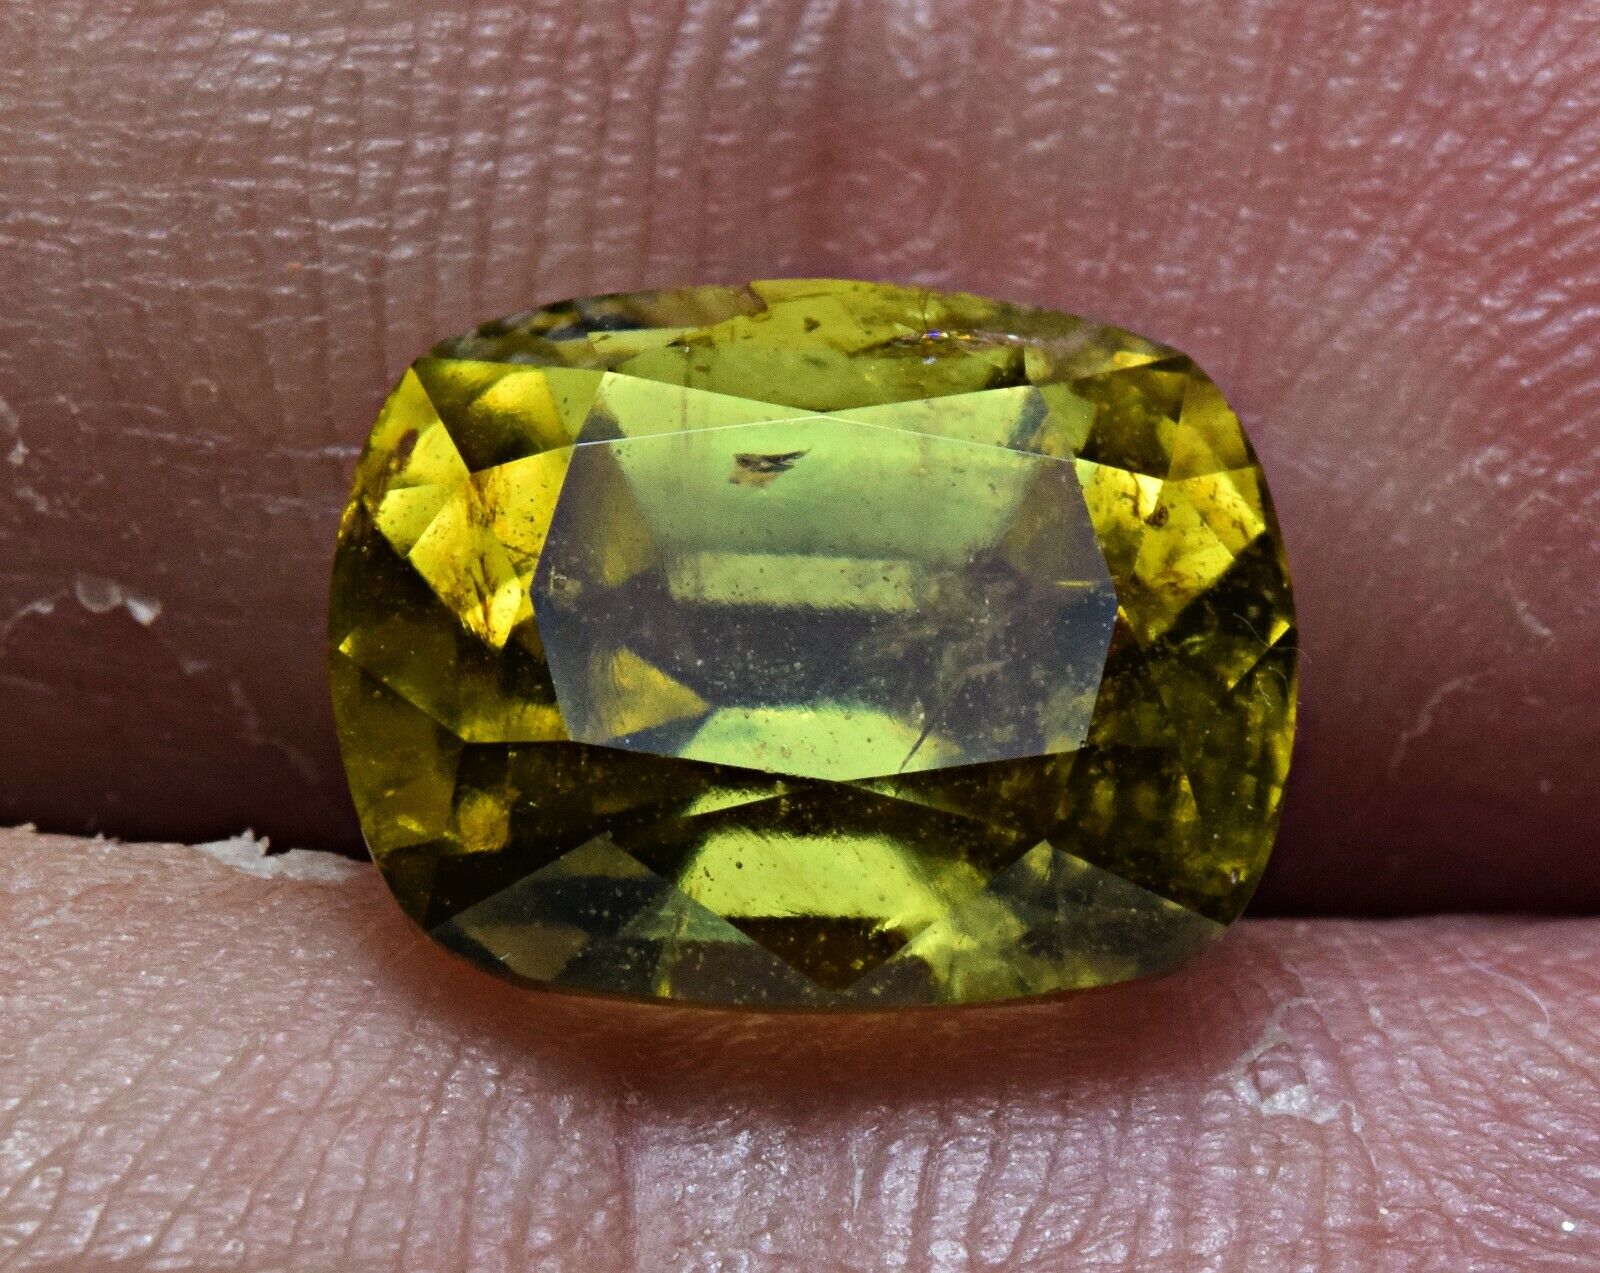 4 Carat Faceted Fluorescent Dravite Tourmaline Cut Gemstone From Afghanistan   